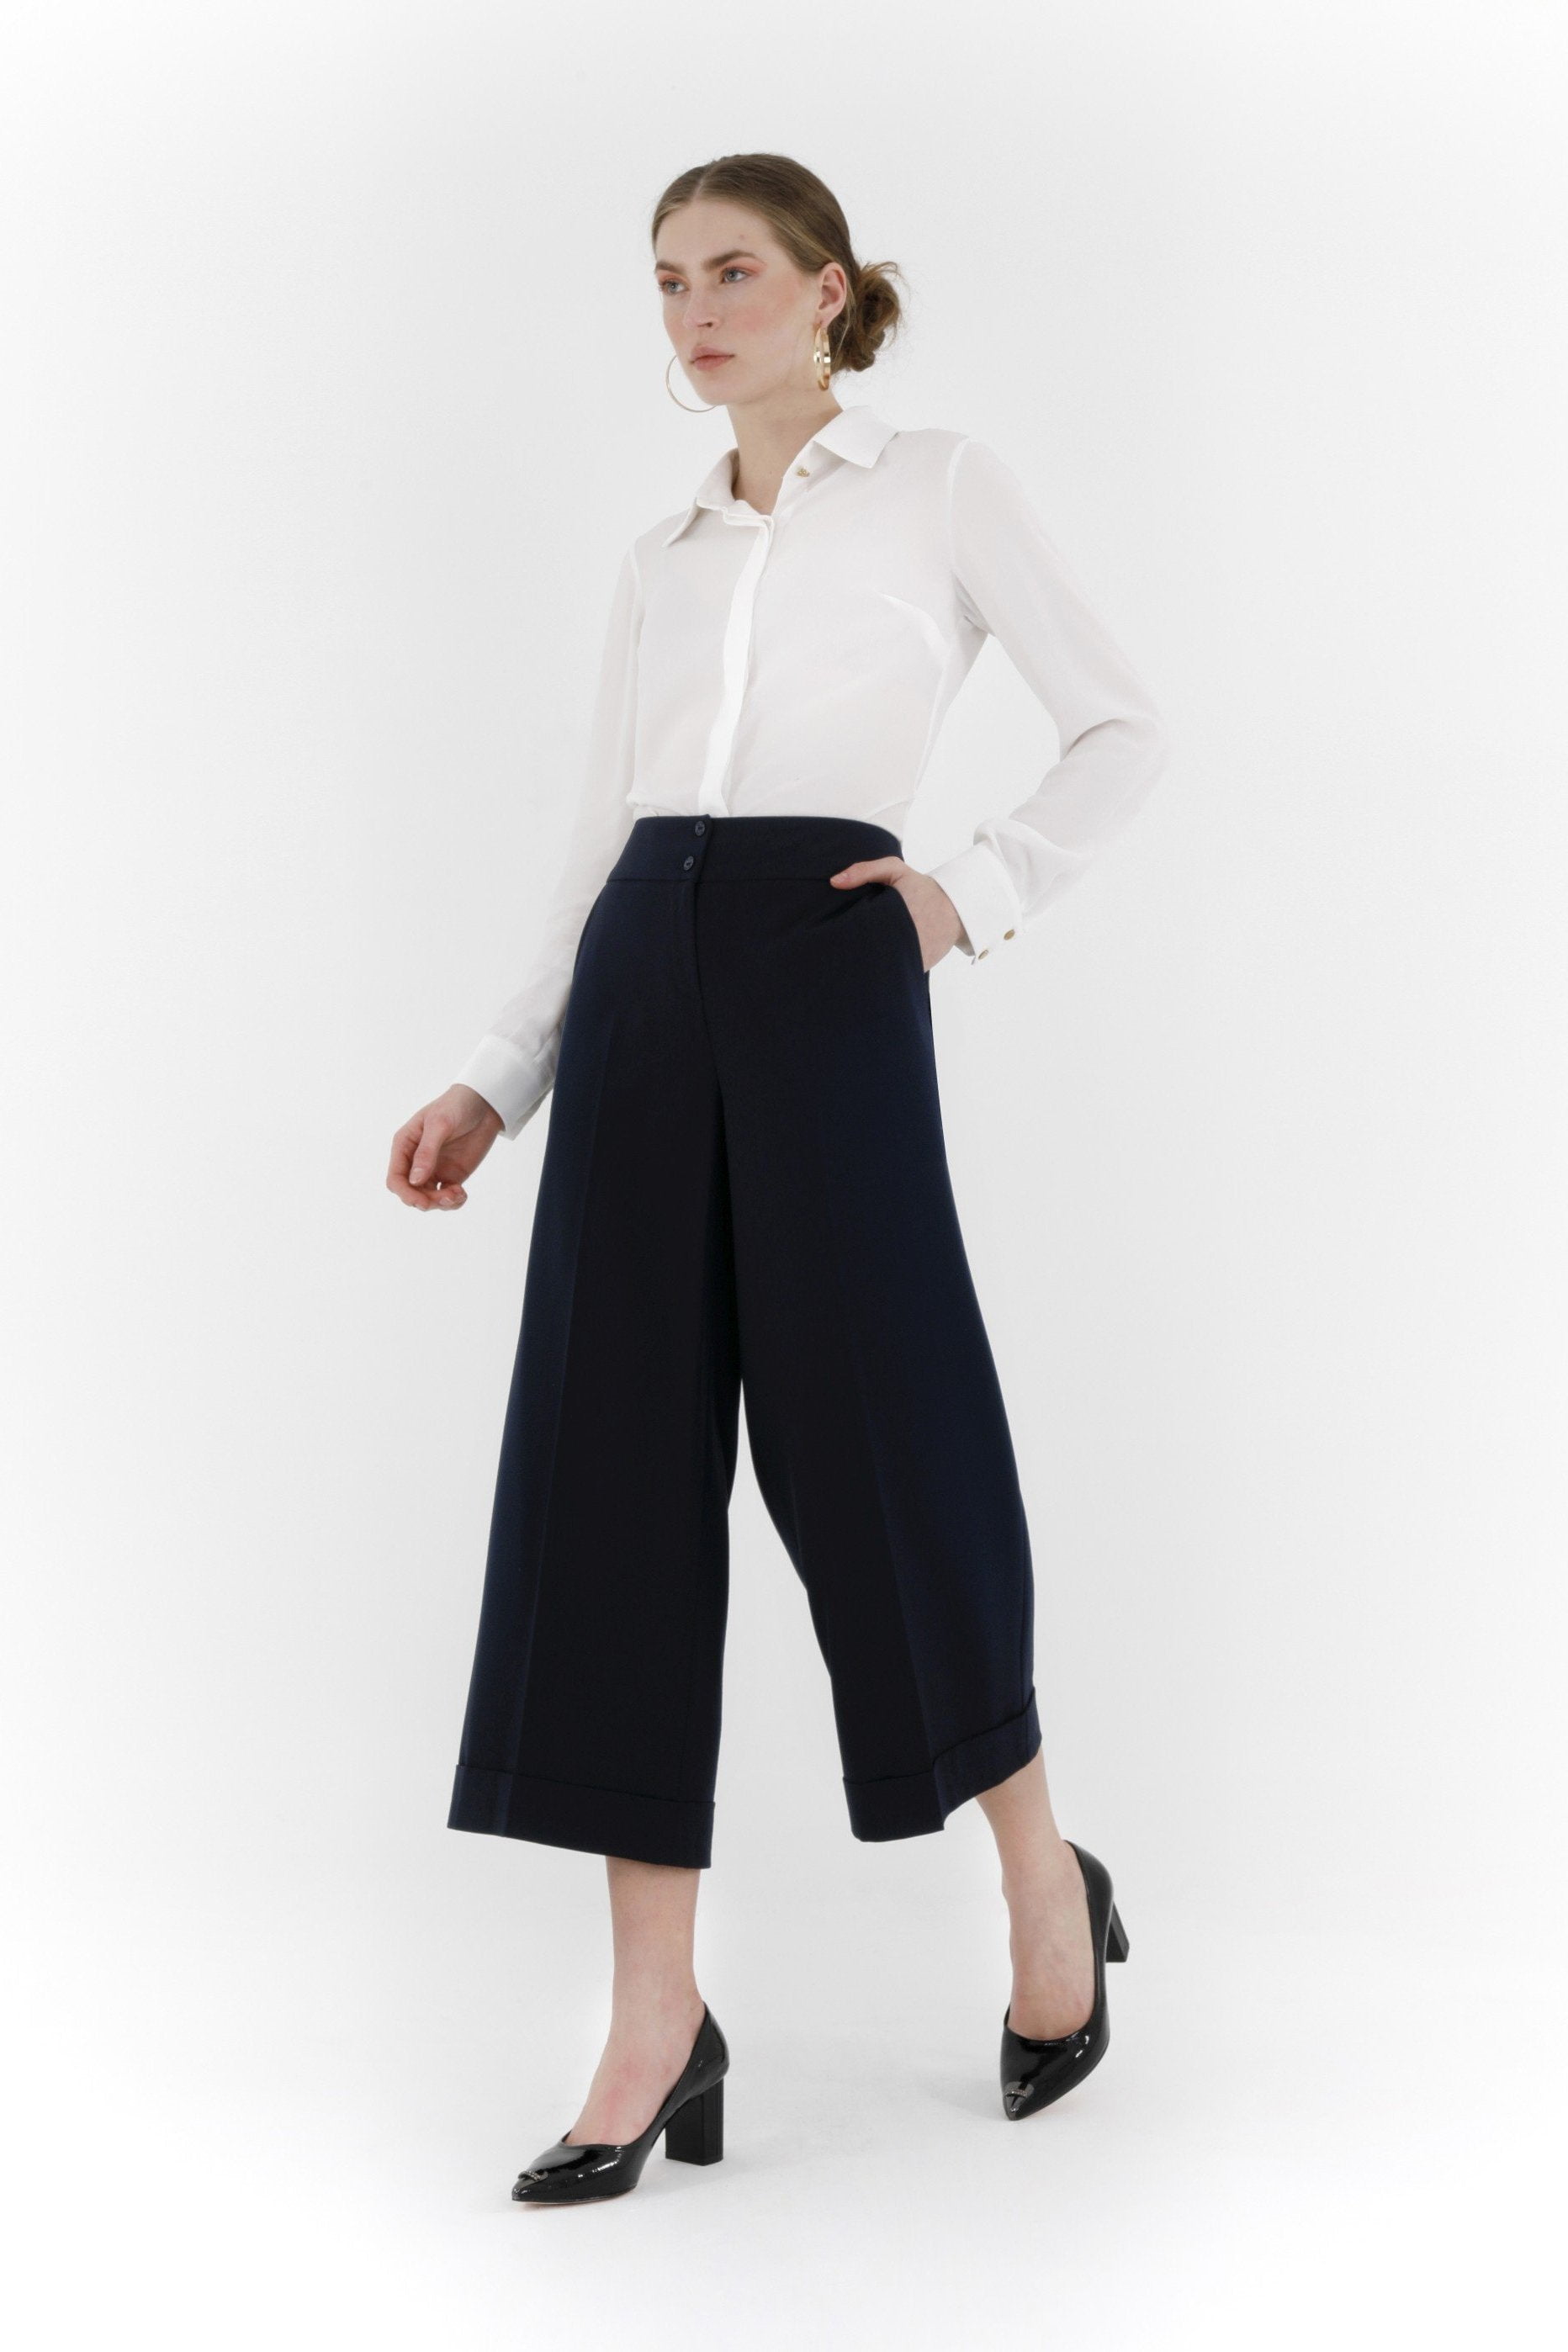 Women's High Waist Stretchable Formal Wide Leg Parallel Trouser